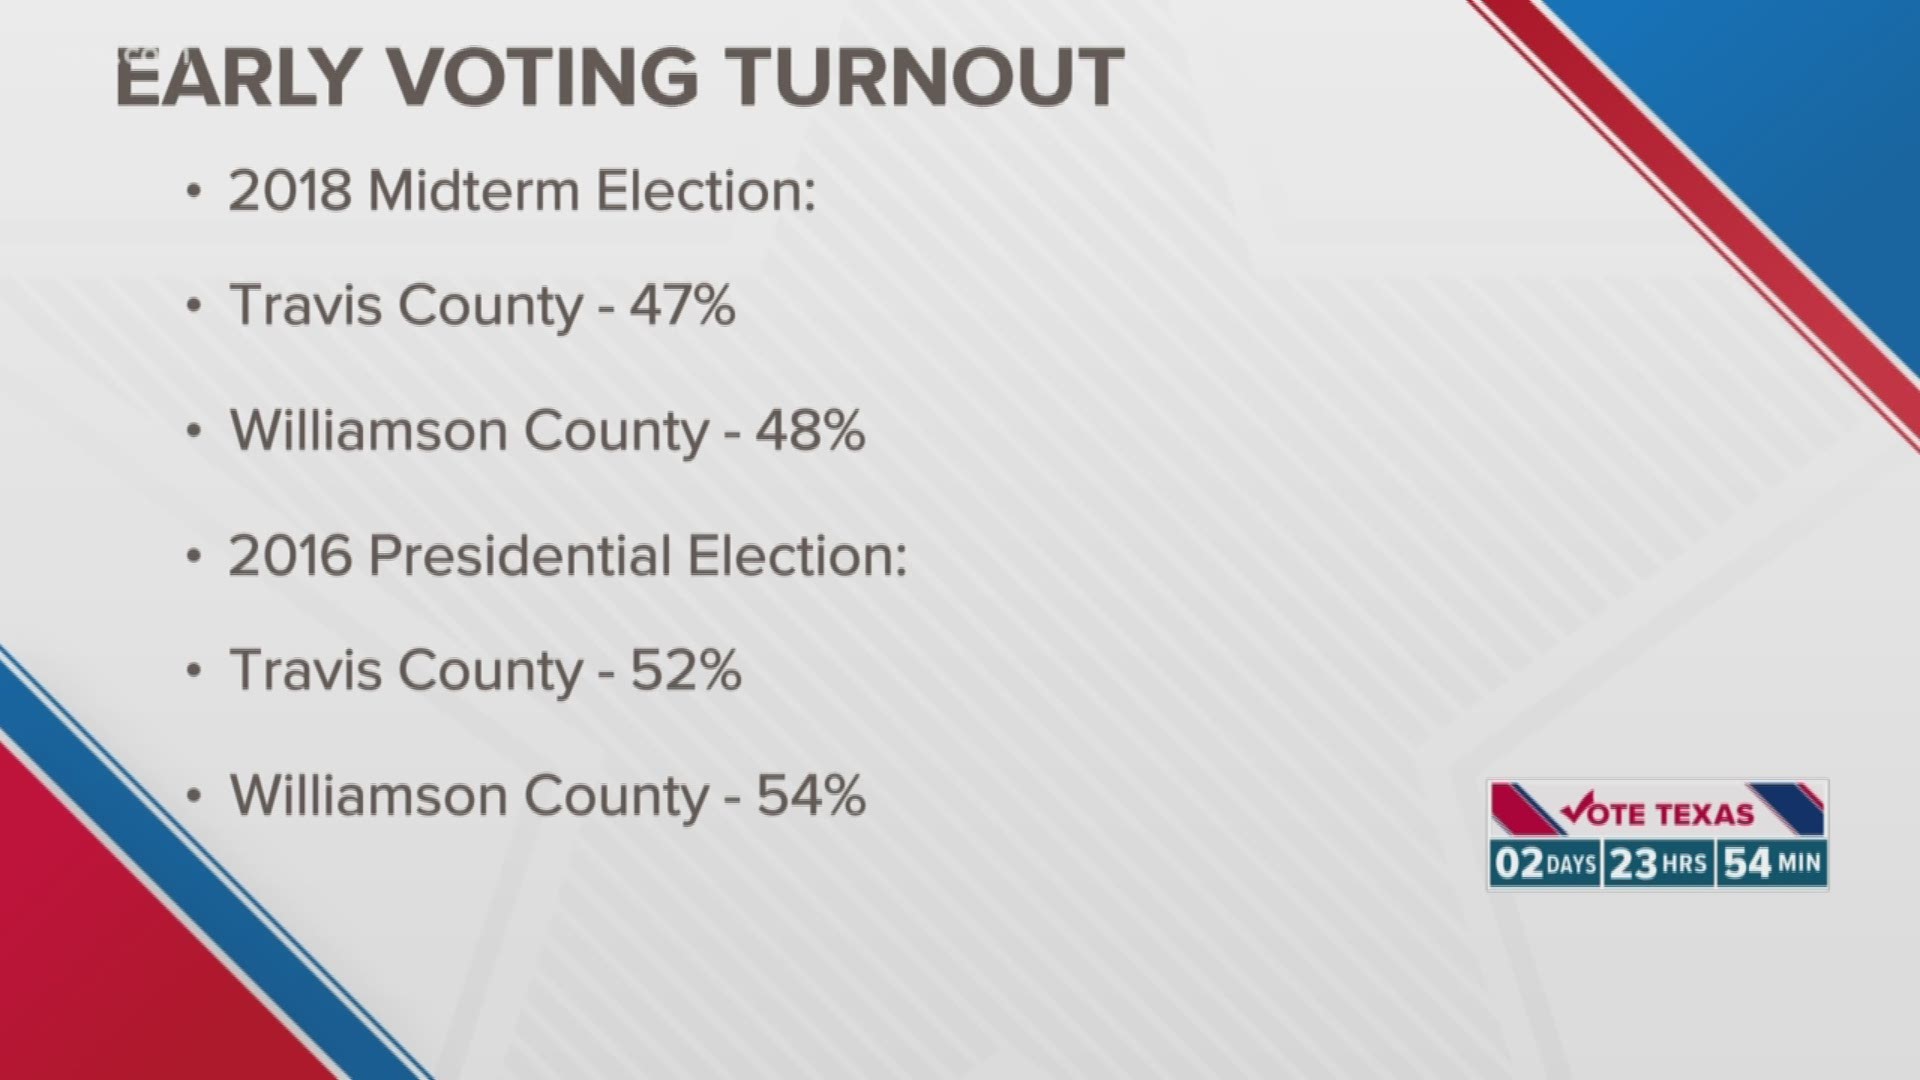 Across the state of Texas, voting numbers are up, and the tight senate race may be driving turnout. Records have been set in every major county, including Travis County, according to the Texas Secretary of State. Dallas, Tarrant and Bexar counties have al